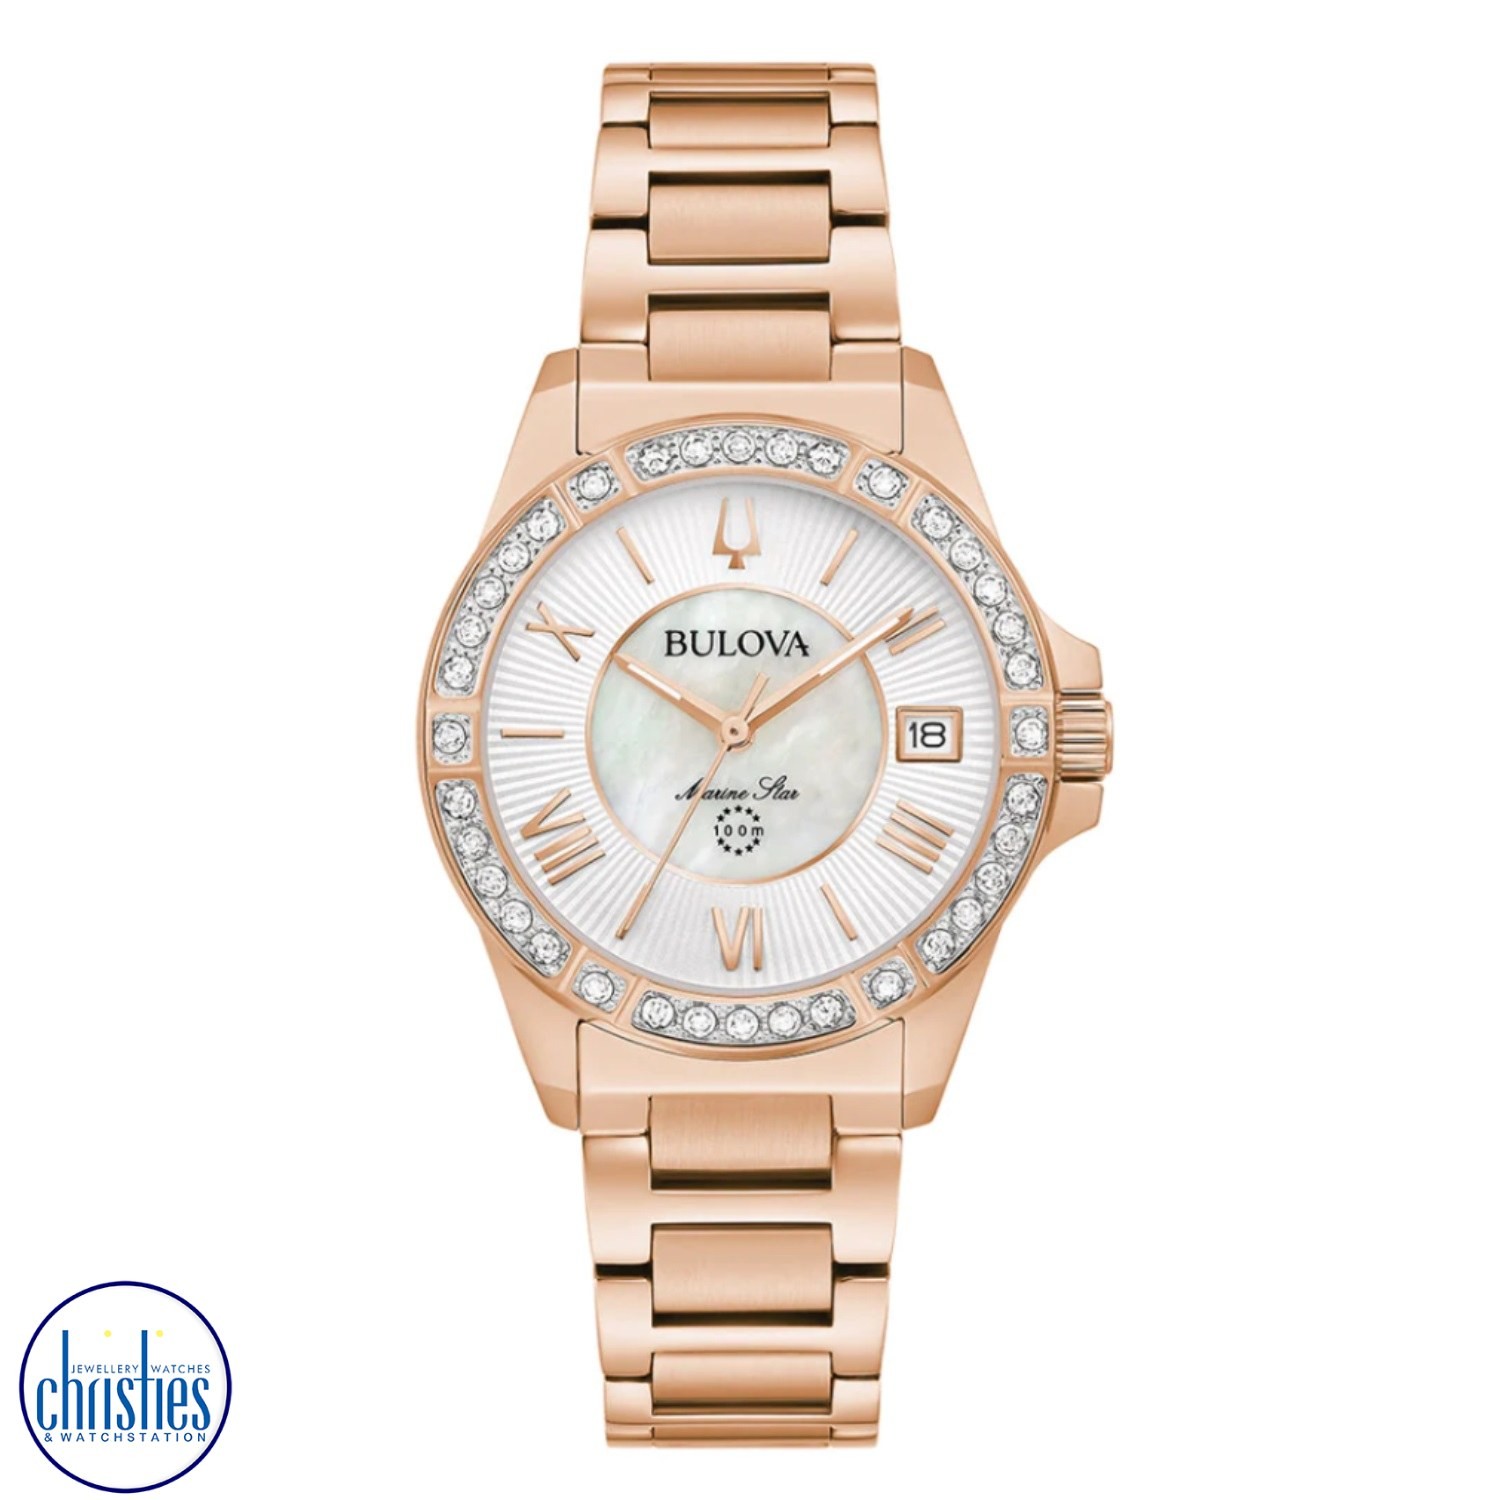 Add a touch of elegance to your look with the Bulova 98R295 Marine Star women's watch.